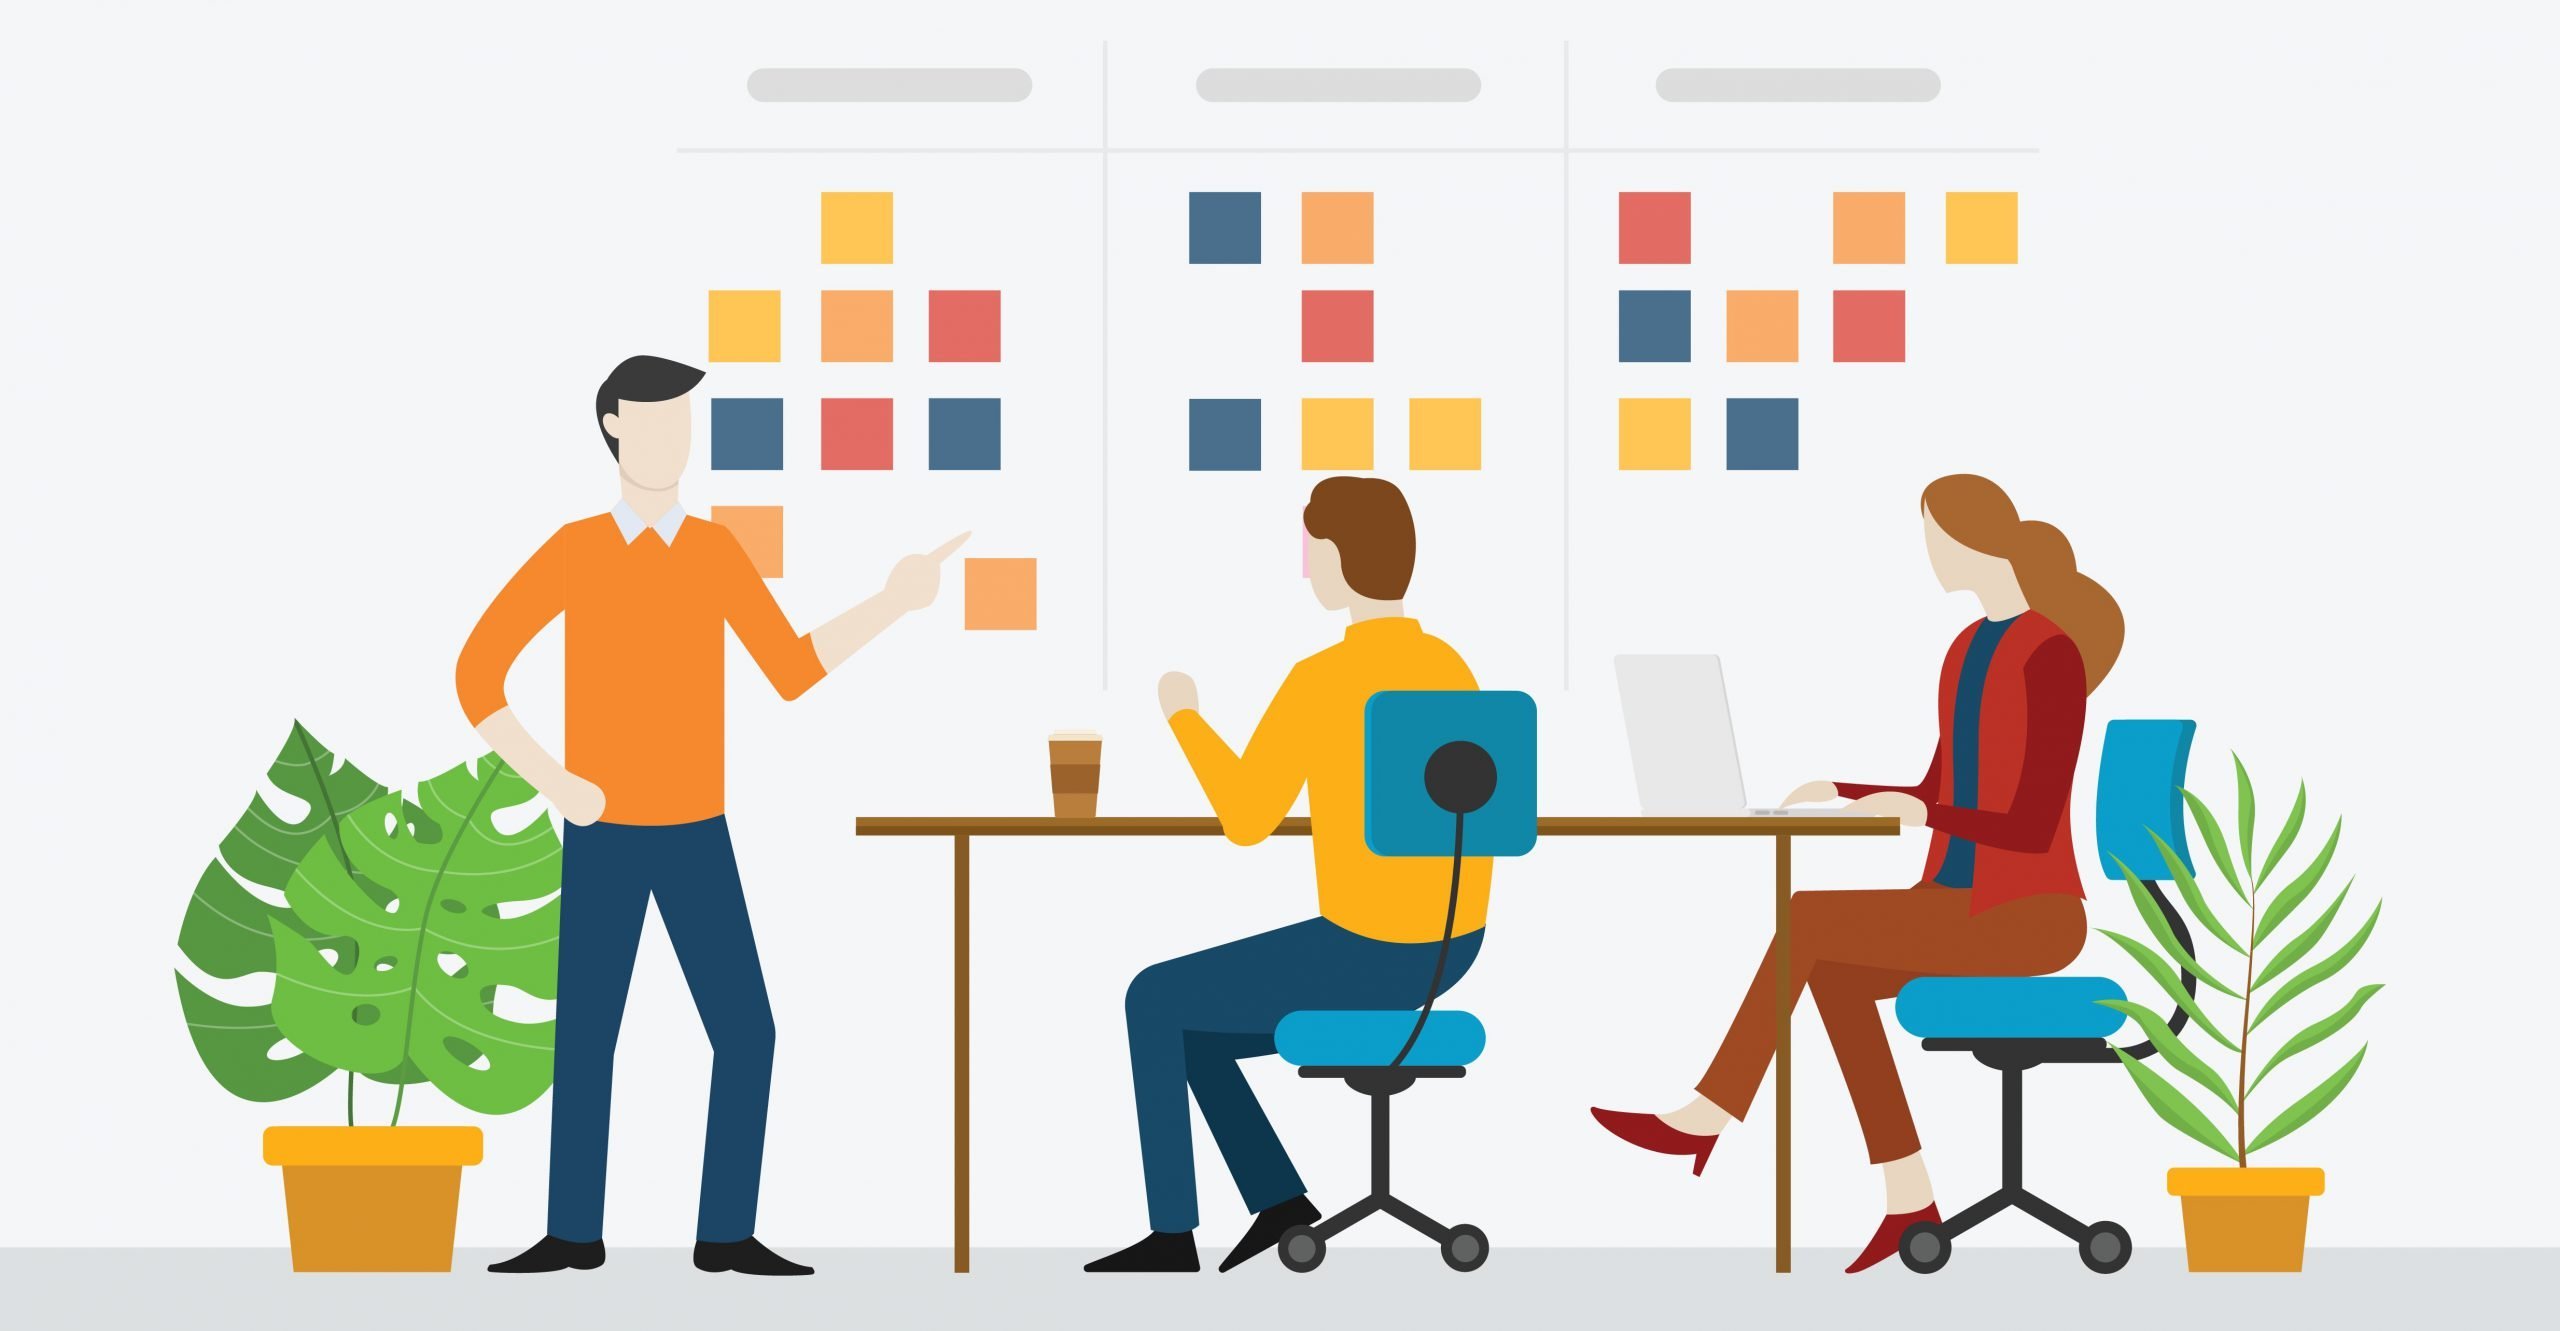 How to improve work in agile teams